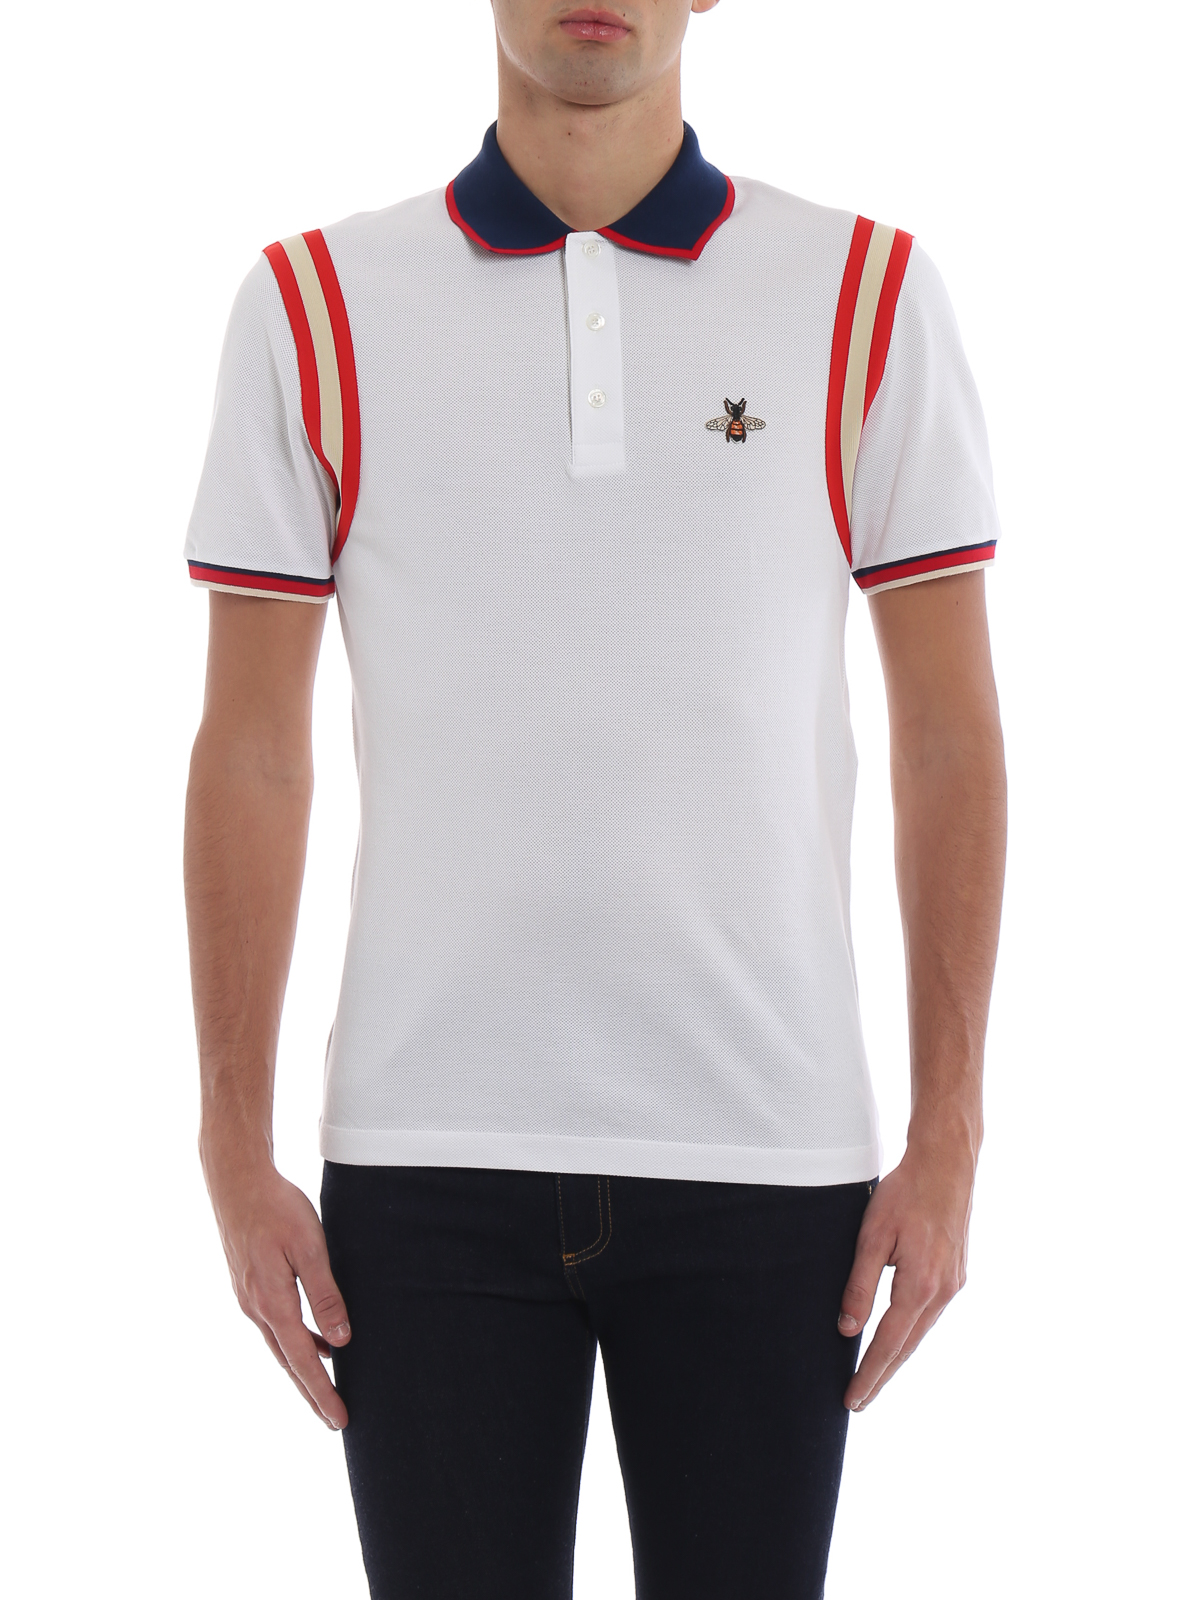 sprogfærdighed Angreb Bliv ophidset Polo shirts Gucci - Bee patch white cotton piquet polo shirt -  500971X9M379134